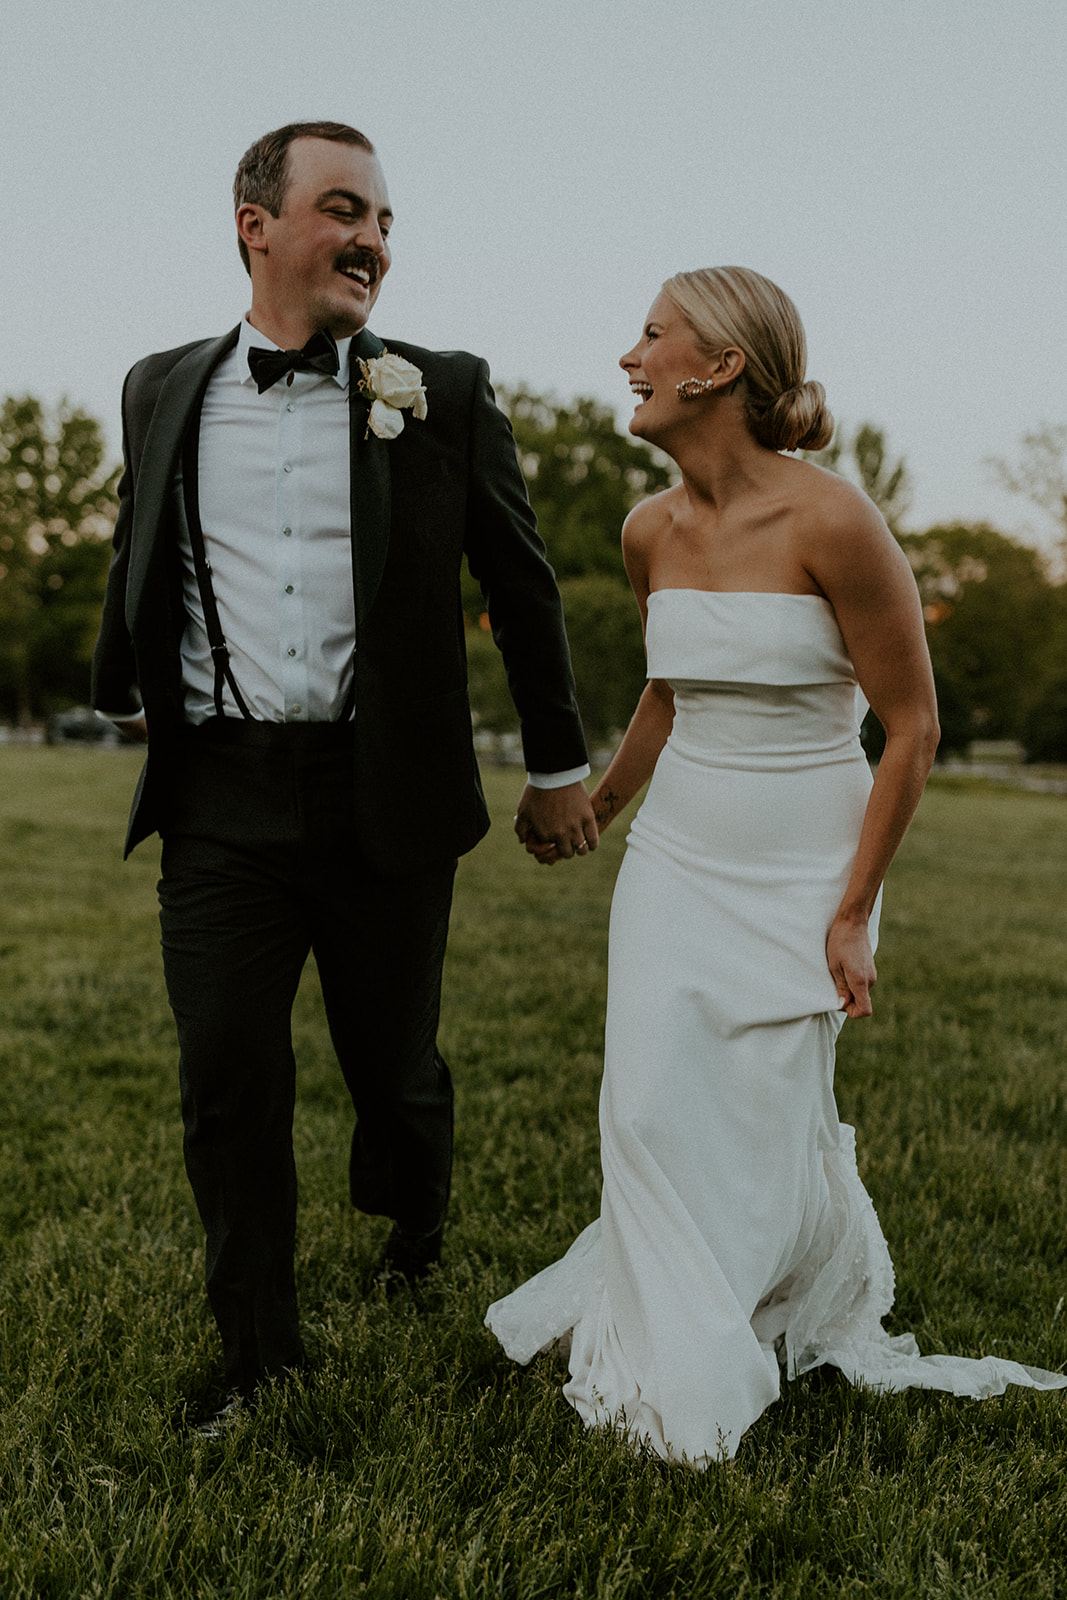 19 Non-Traditional Wedding Ideas To Make Your Wedding Day Uniquely Yours. Couple smiling at each other during their wedding shoot.